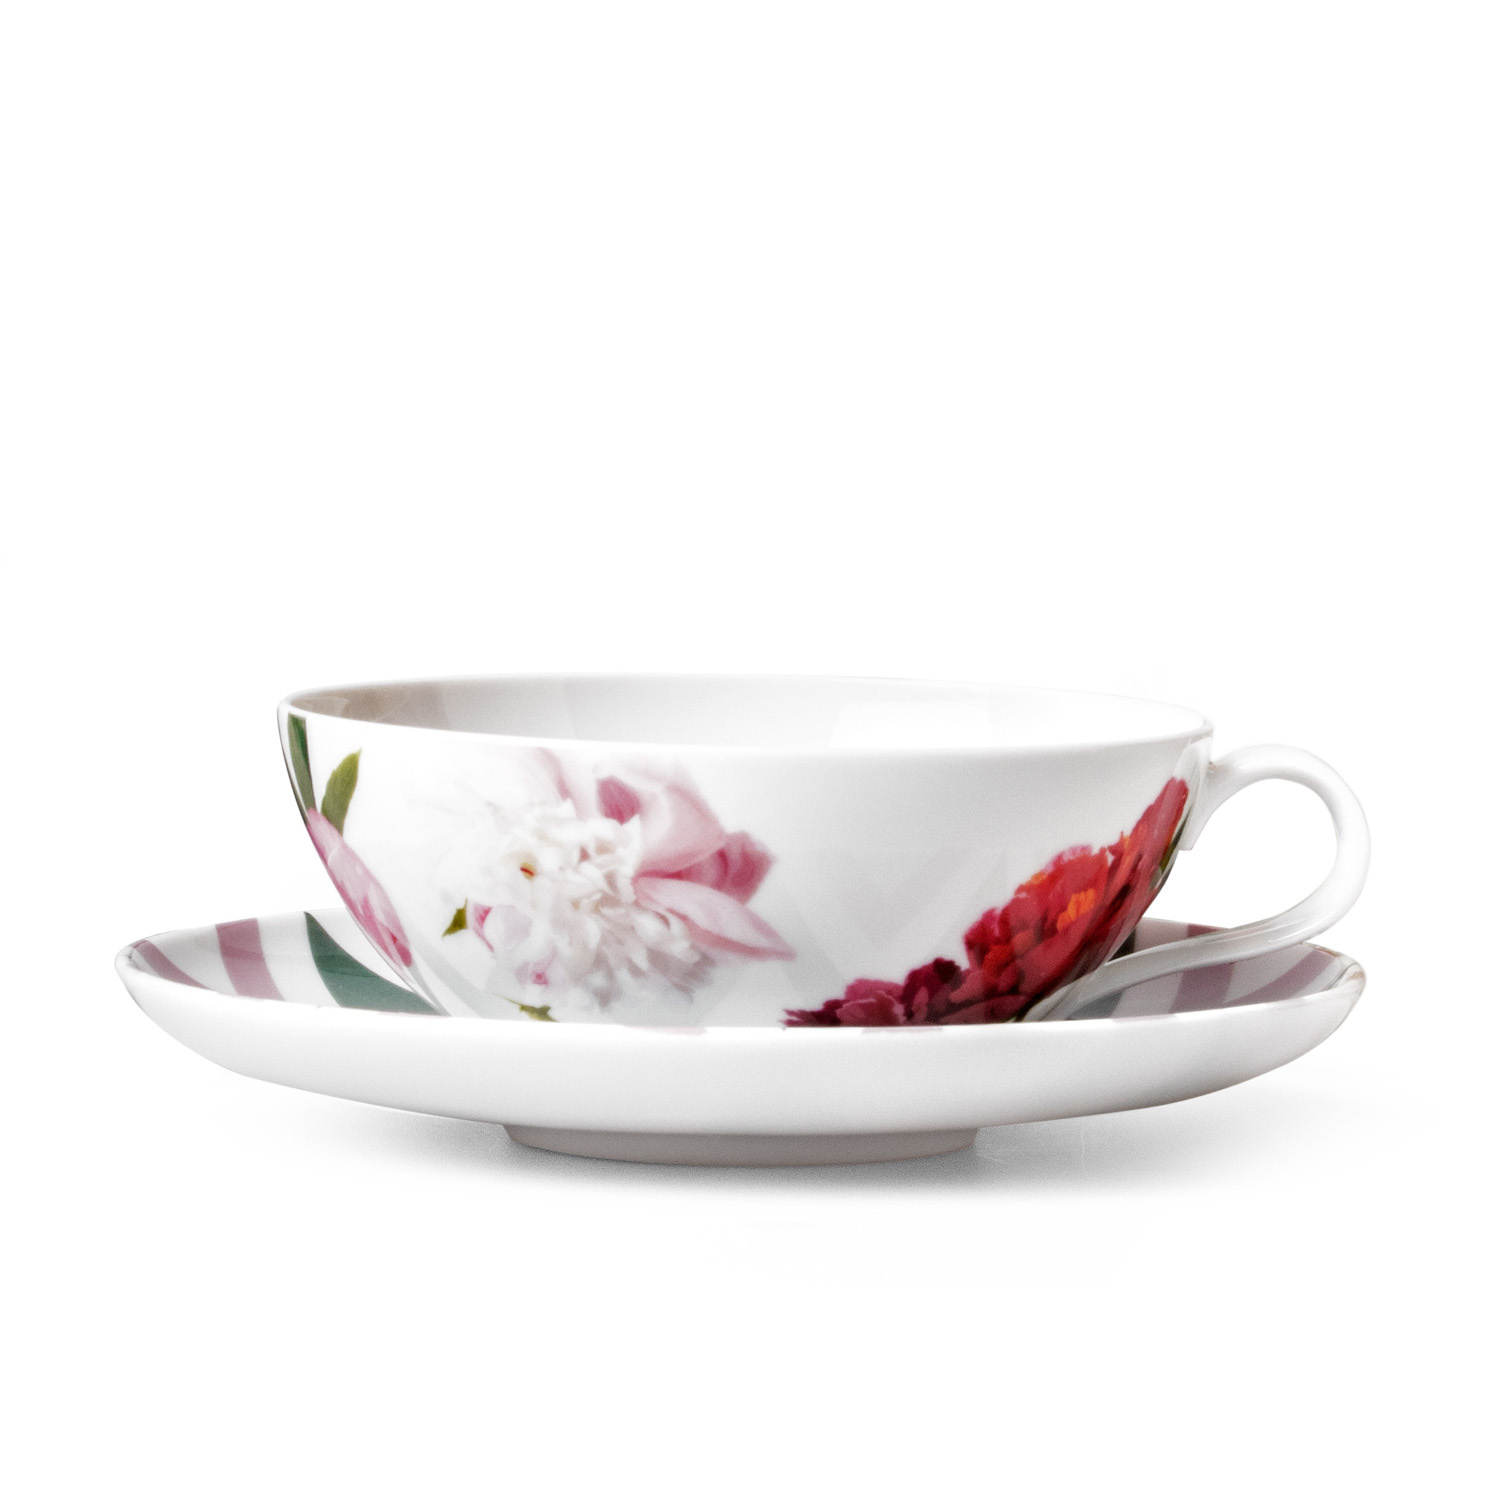 Sieger by Furstenberg Universal Saucer My China! Collection Paraiso